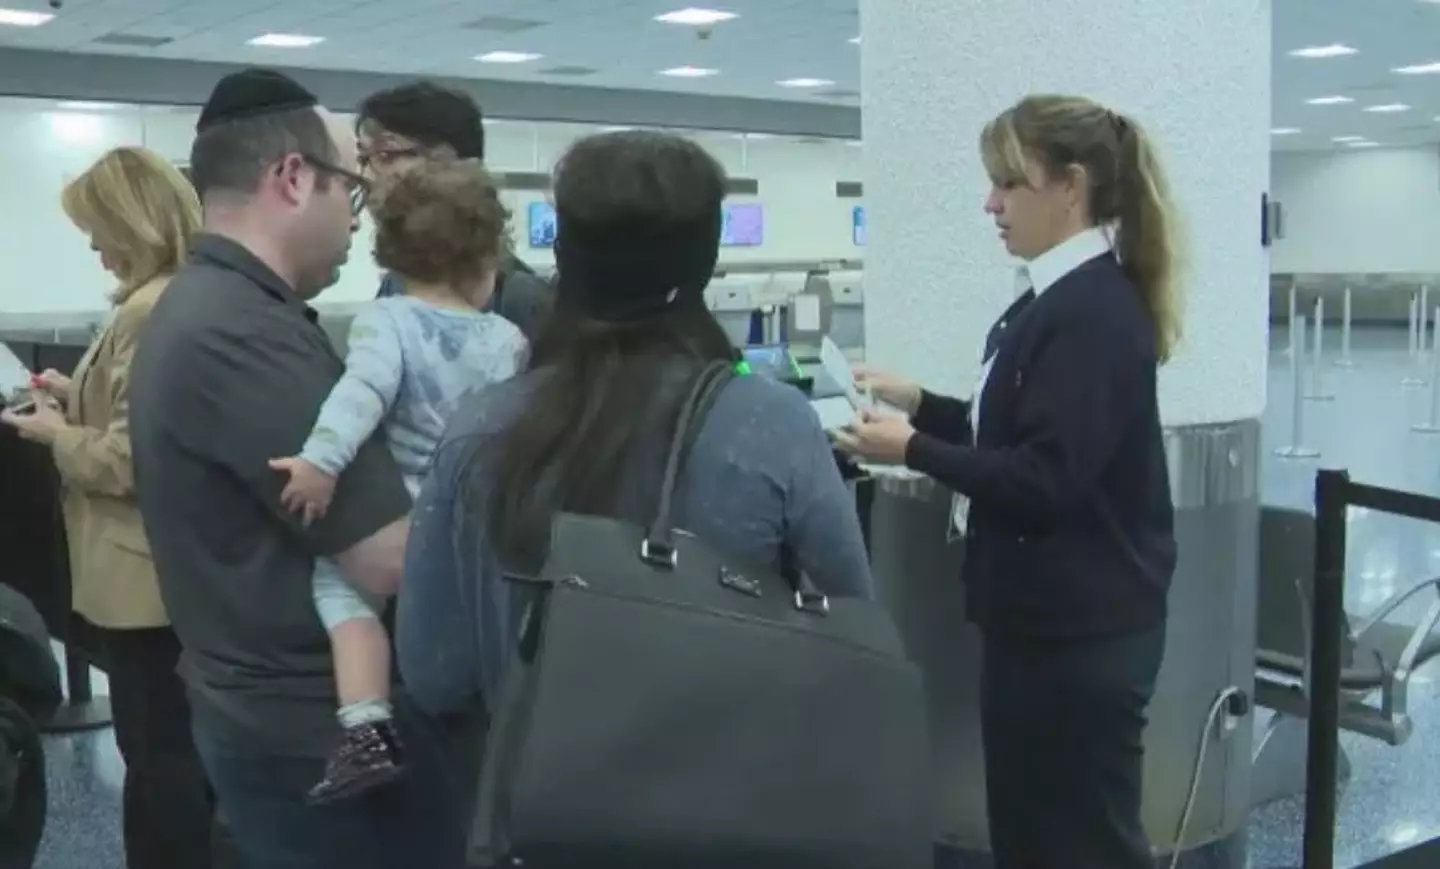 The family claim they were kicked off the American Airlines flight due to their body odor.